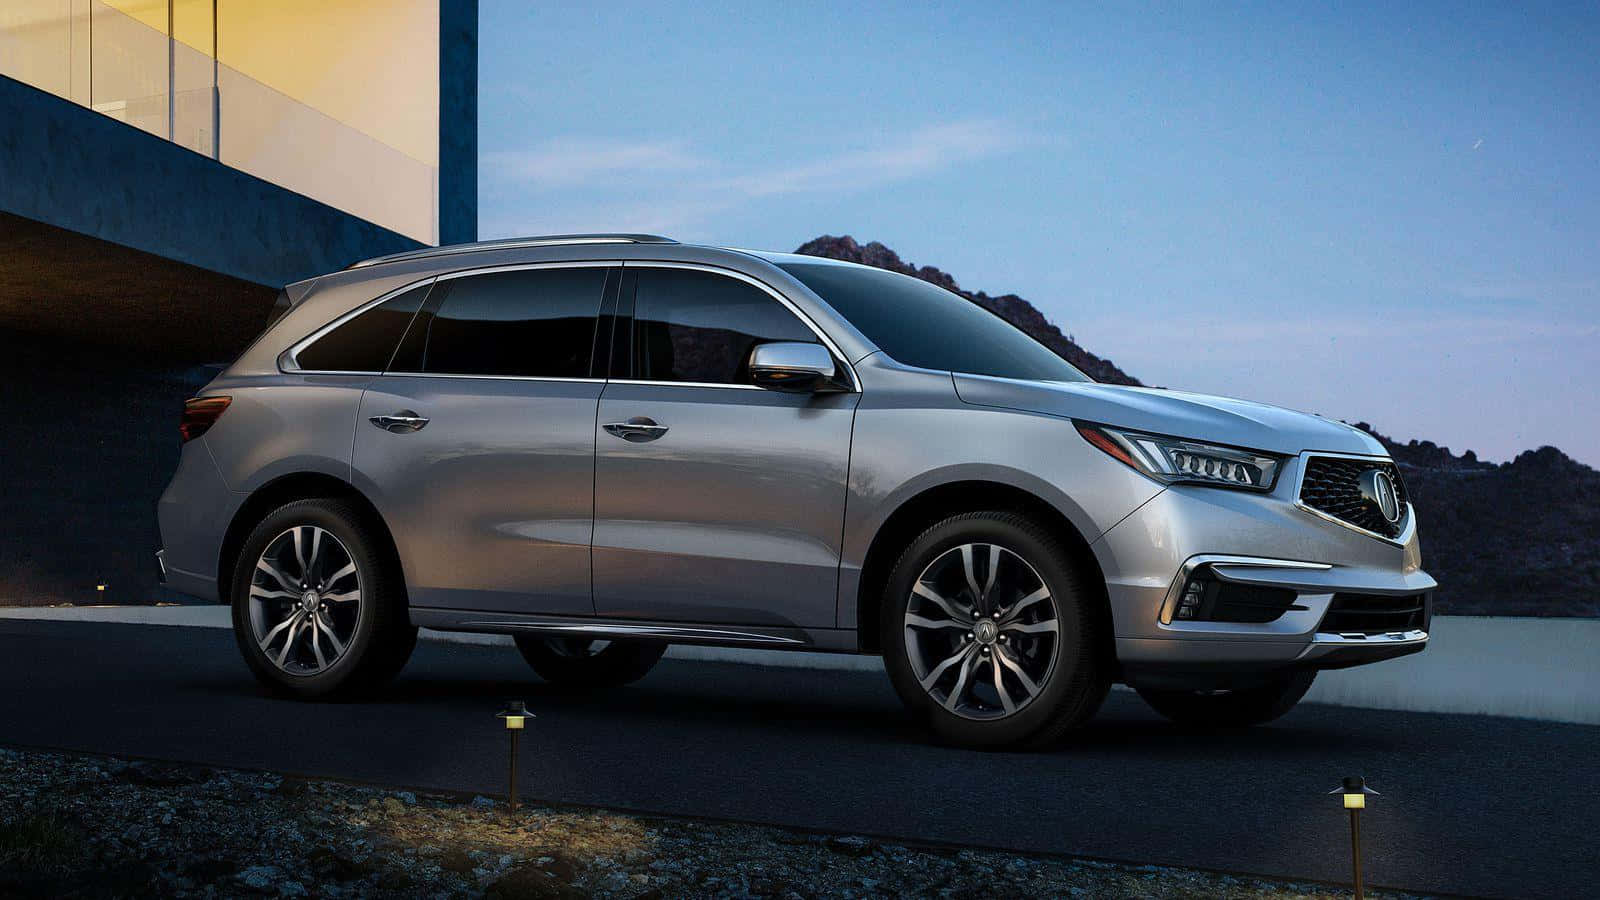 Acura MDX on the Road Wallpaper